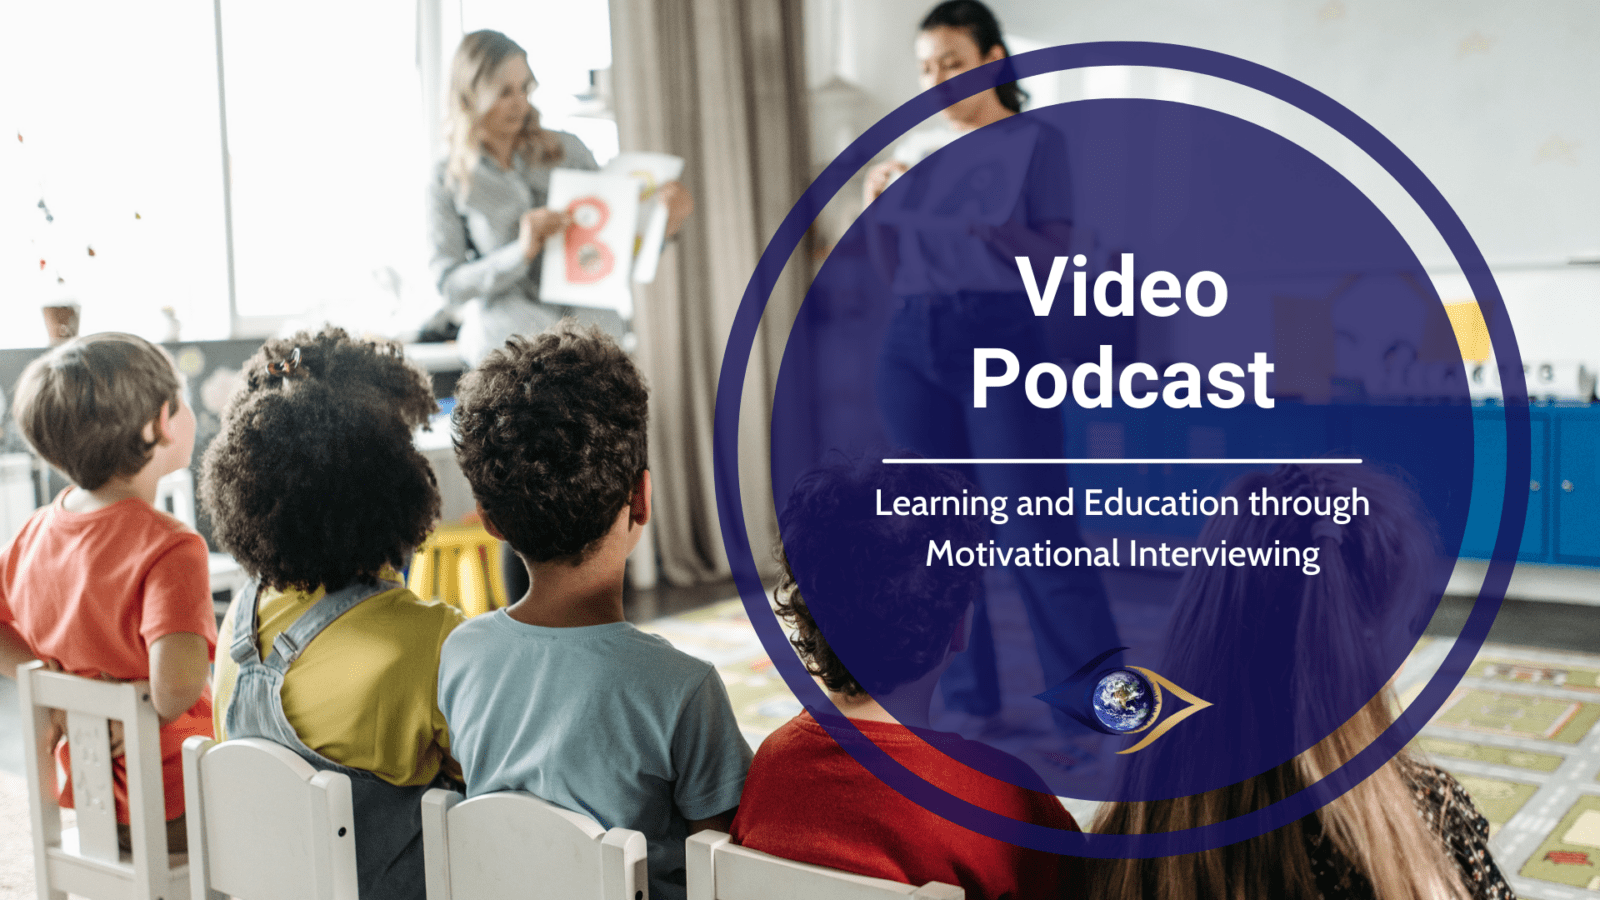 Learning and Education through Motivational Interviewing